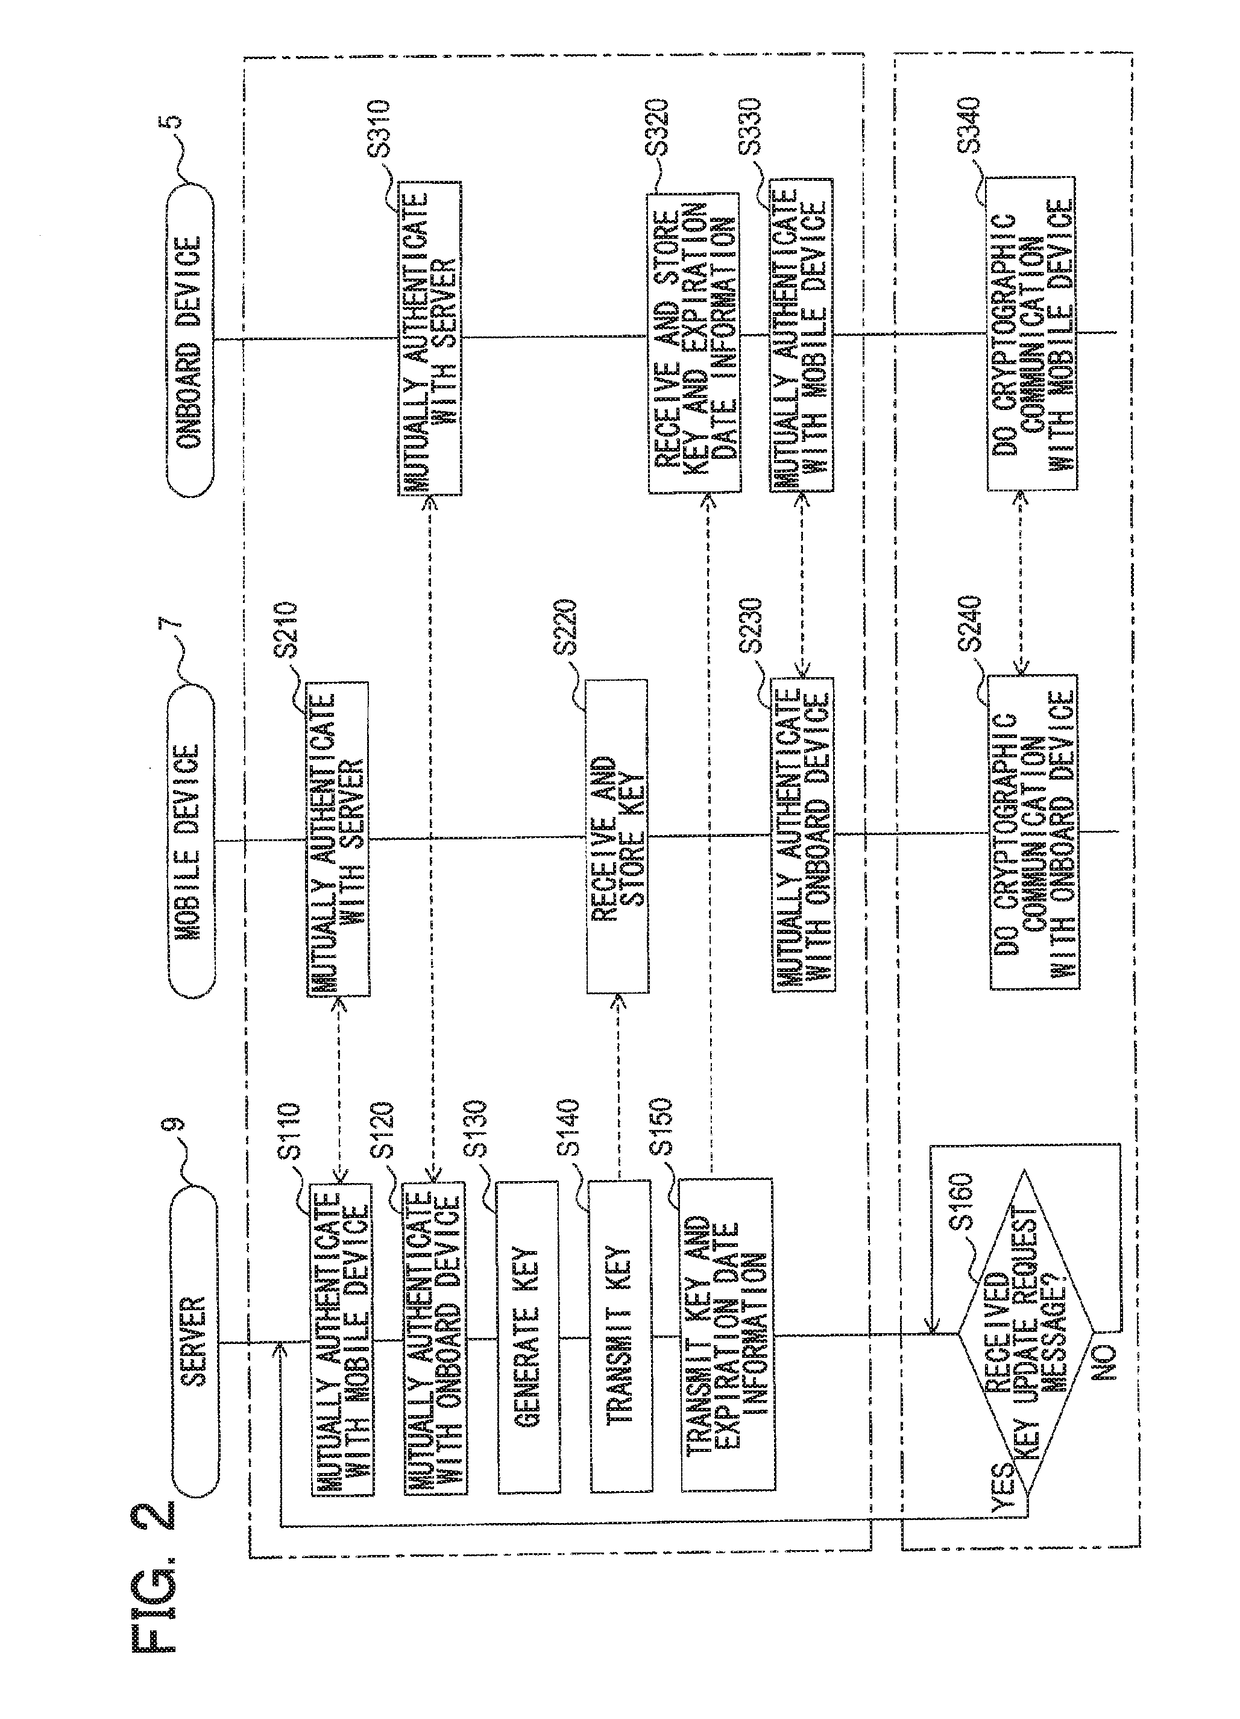 Vehicle communication system, onboard apparatus, and key issuing apparatus